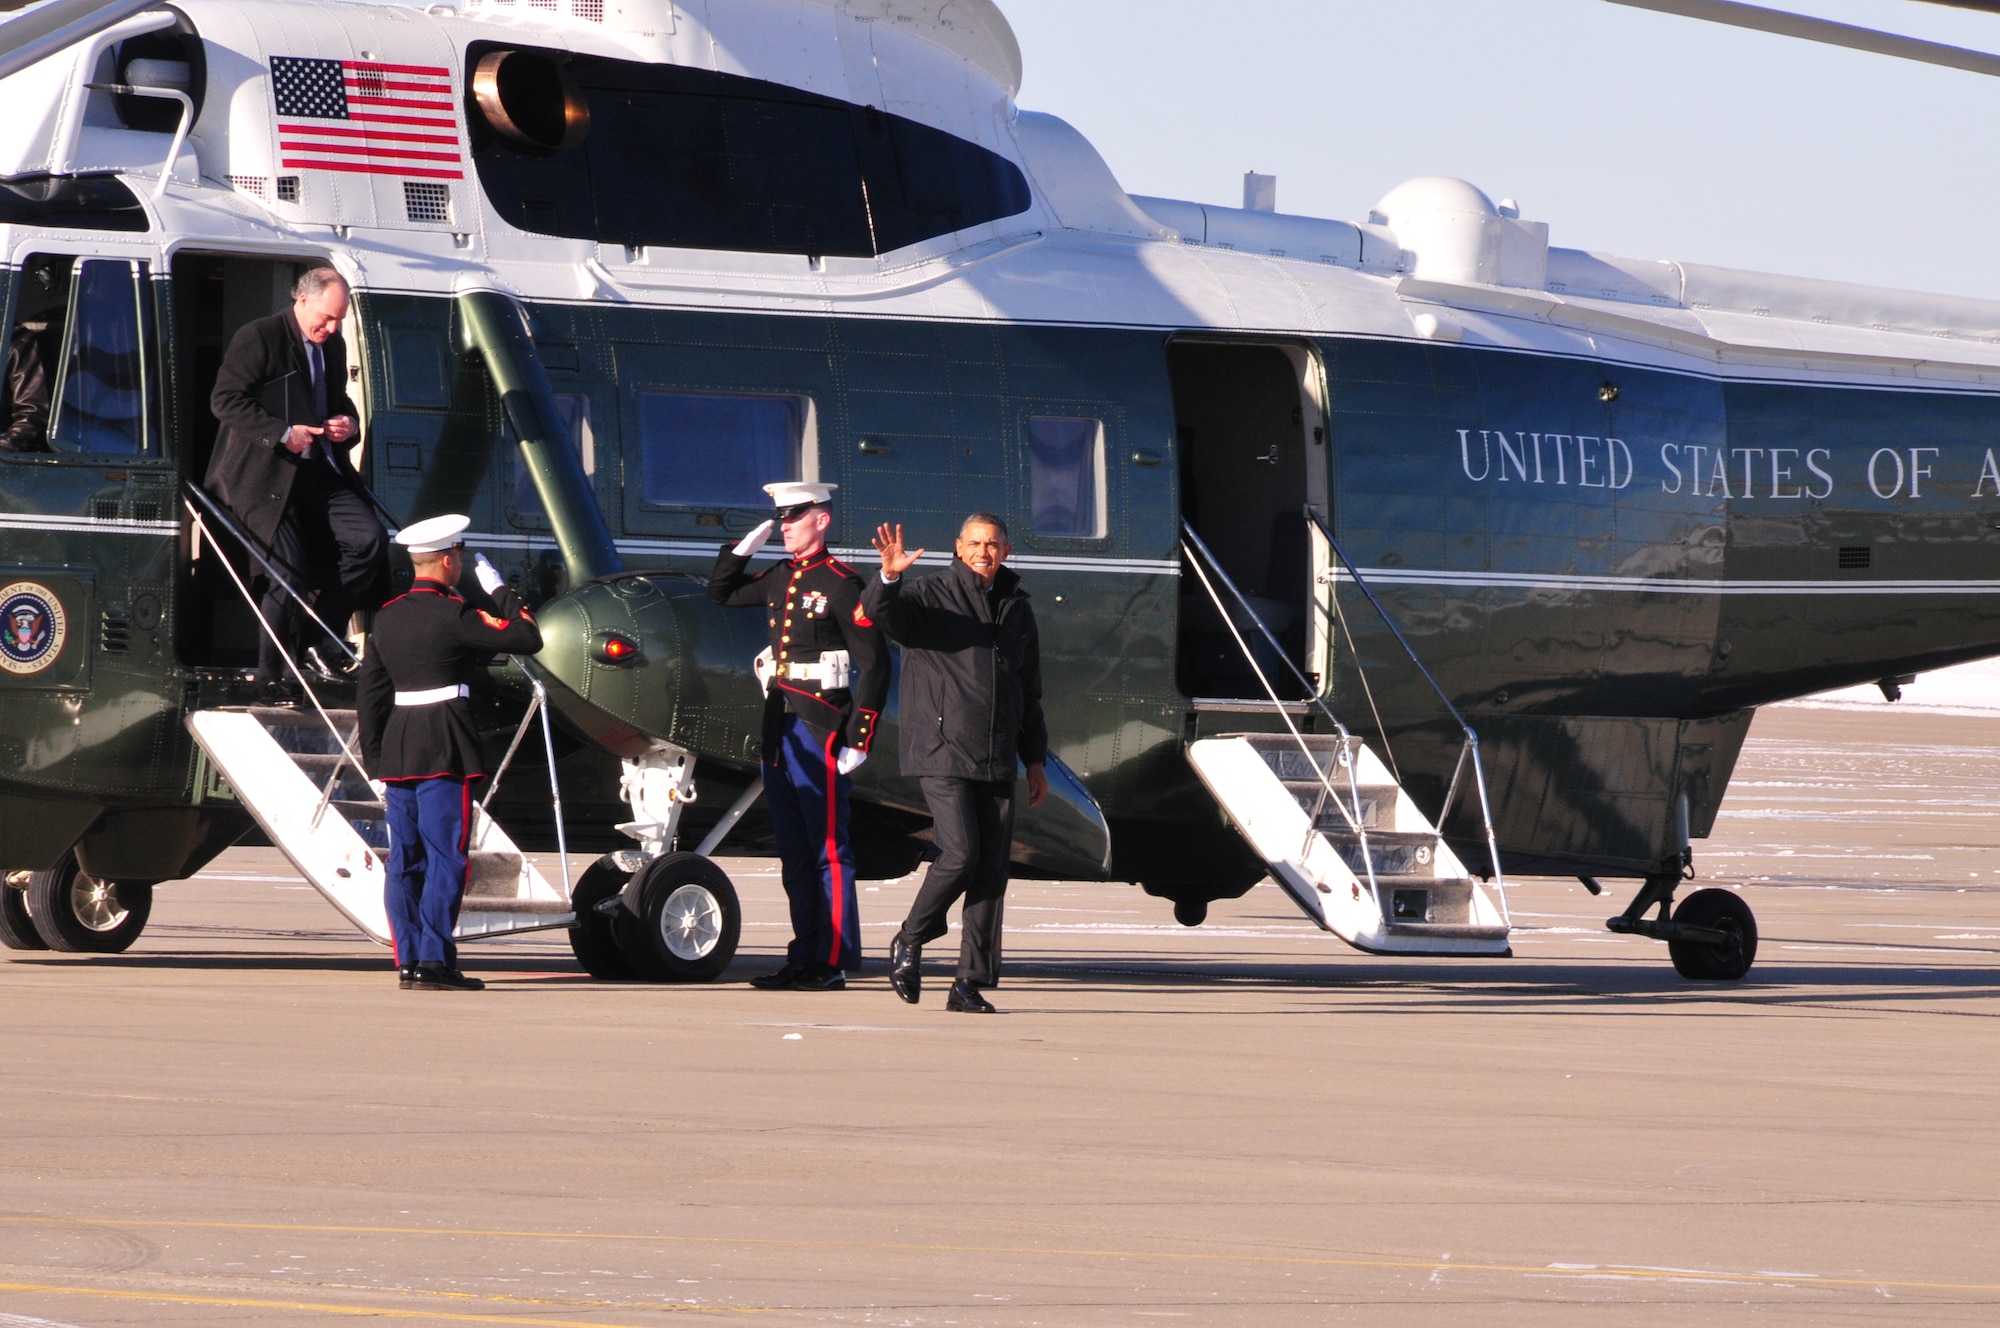 The President of the United States, Barack Obama, landed at the 171st Air Refueling Wing, Coraopolis, PA., in Air Force One at approximately 12:15p.m. January 29, 2014 before traveling to the U.S. Steel plant in West Mifflin, near Pittsburgh, to deliver a speech as part of a two-day tour used to promote his proposals given during the State of the Union address. (Air National Guard Photo by Master Sgt. Stacey Barkey/Released)